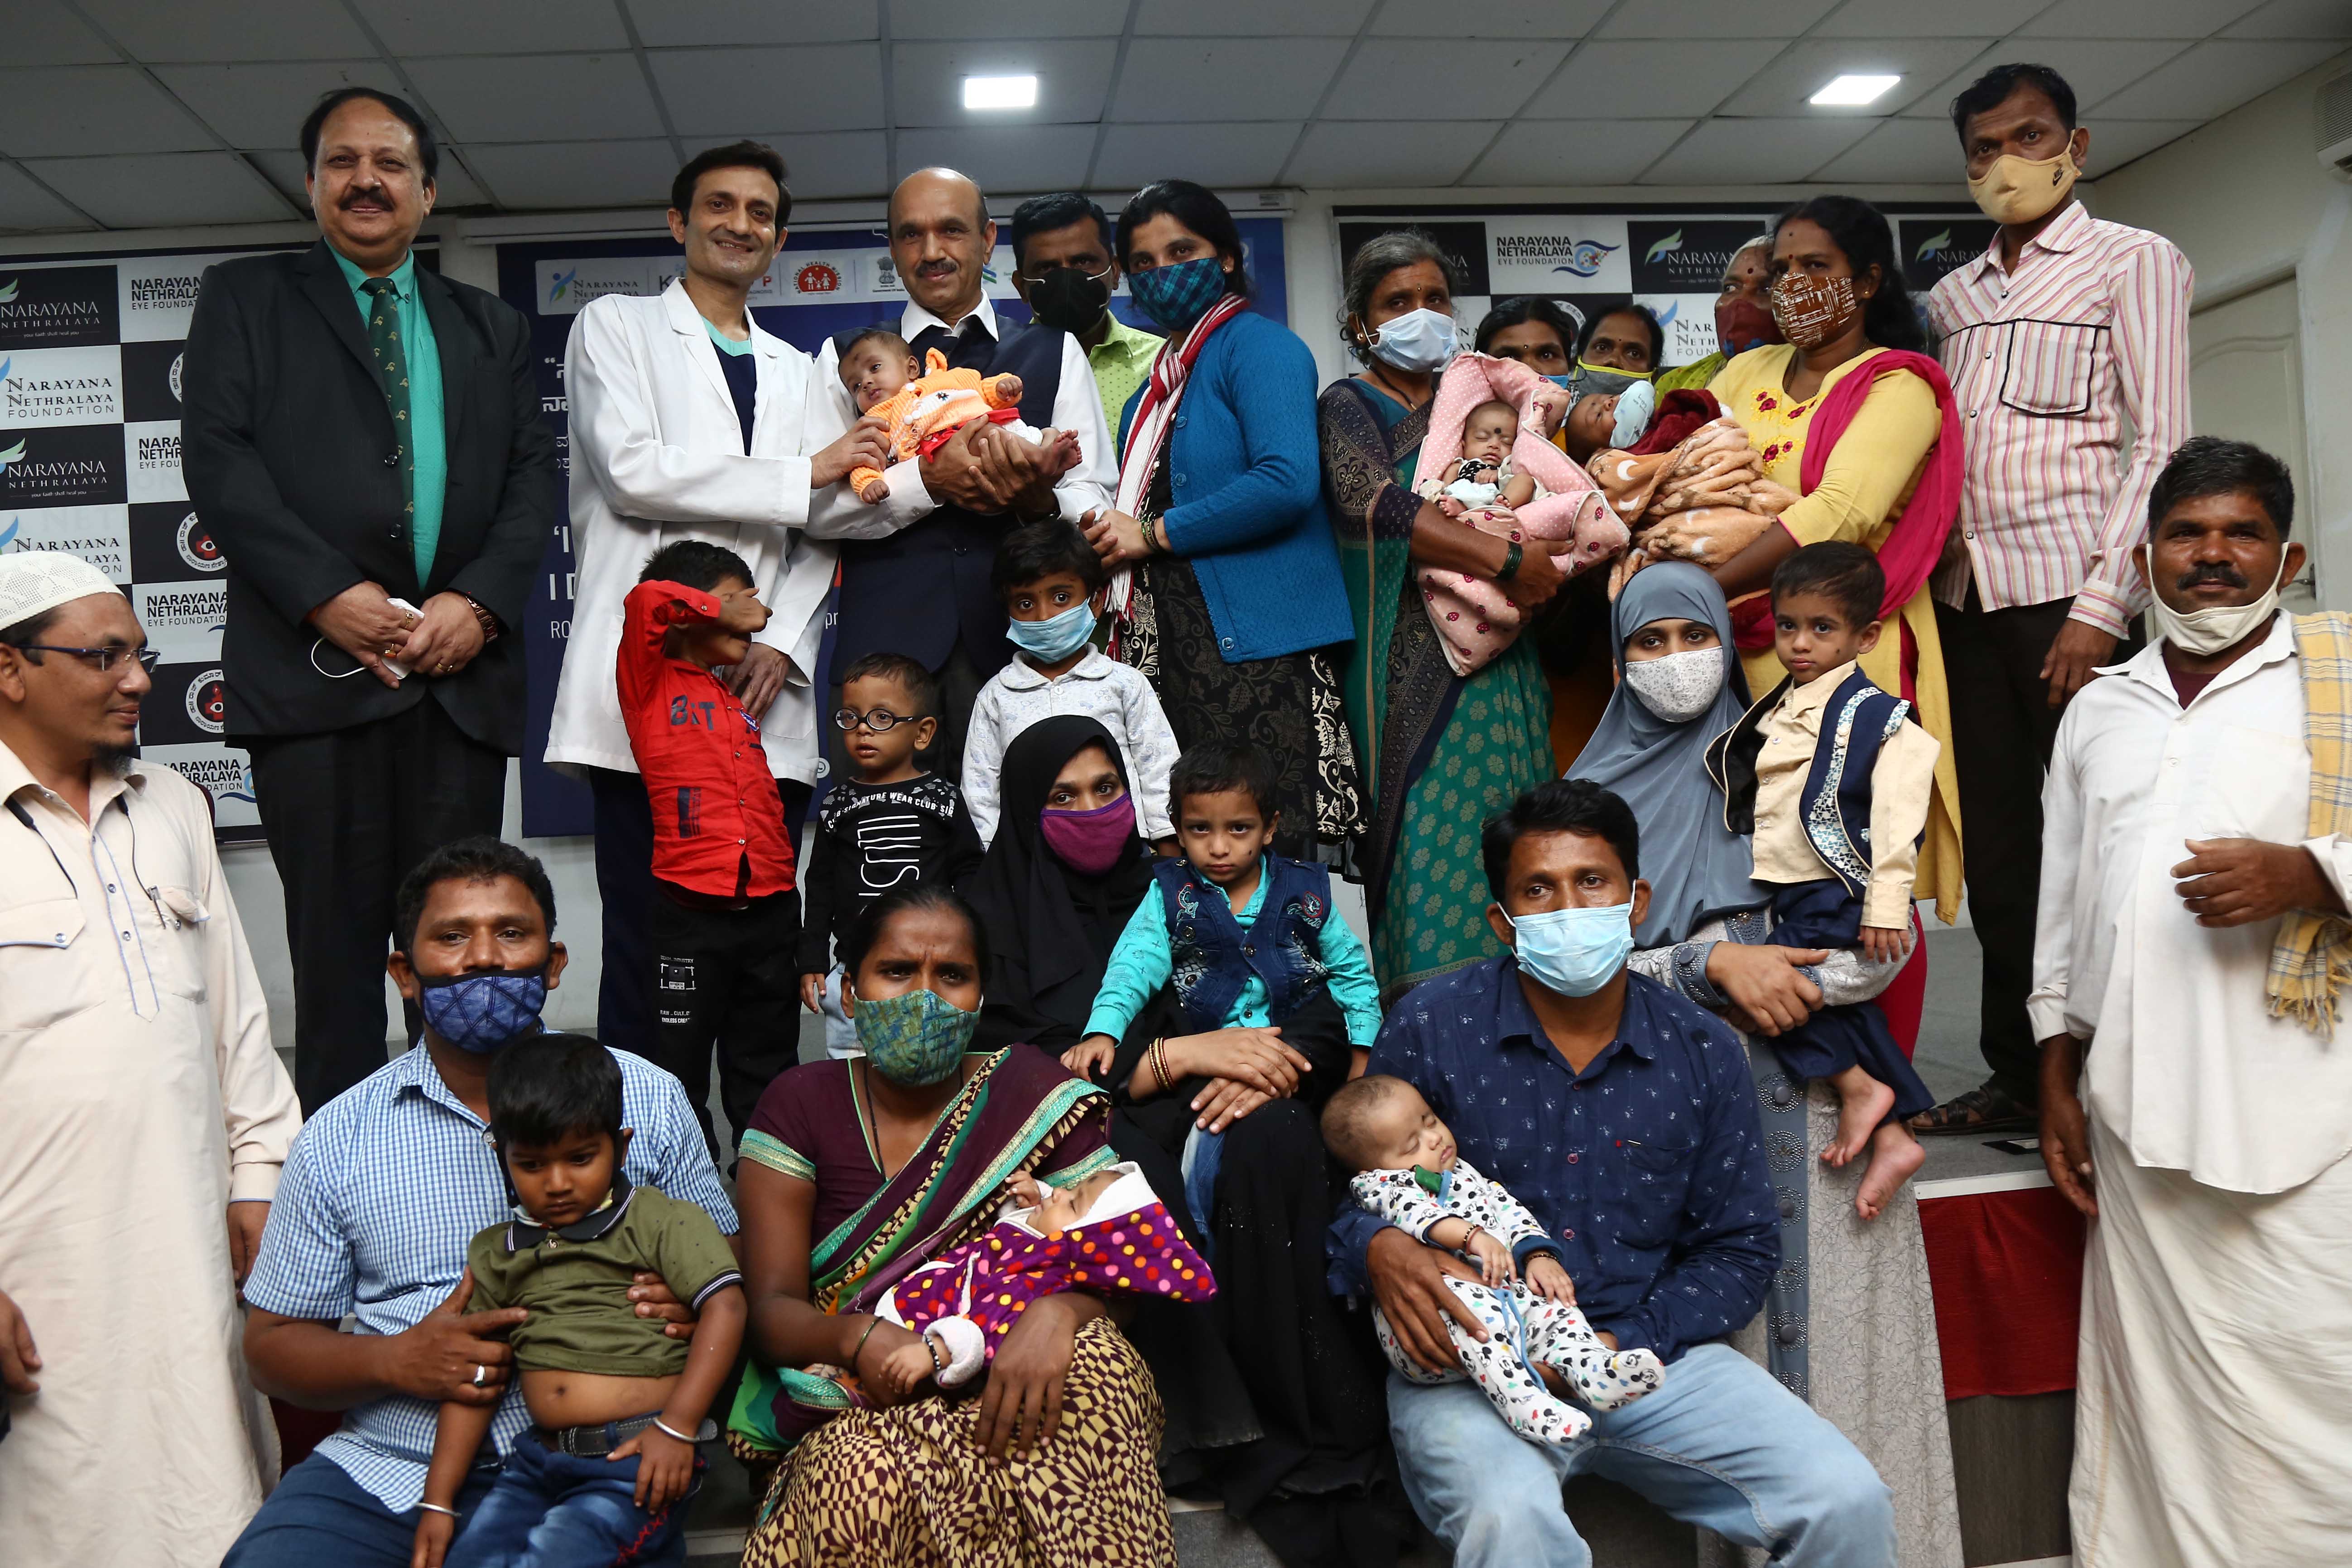 The first telemedicine-based ROP diagnostic programme in the world tailored for rural areas, conceived by Narayana Nethralaya, has been saving premature children from going blind, especially in the context of the Covid19 pandemic.